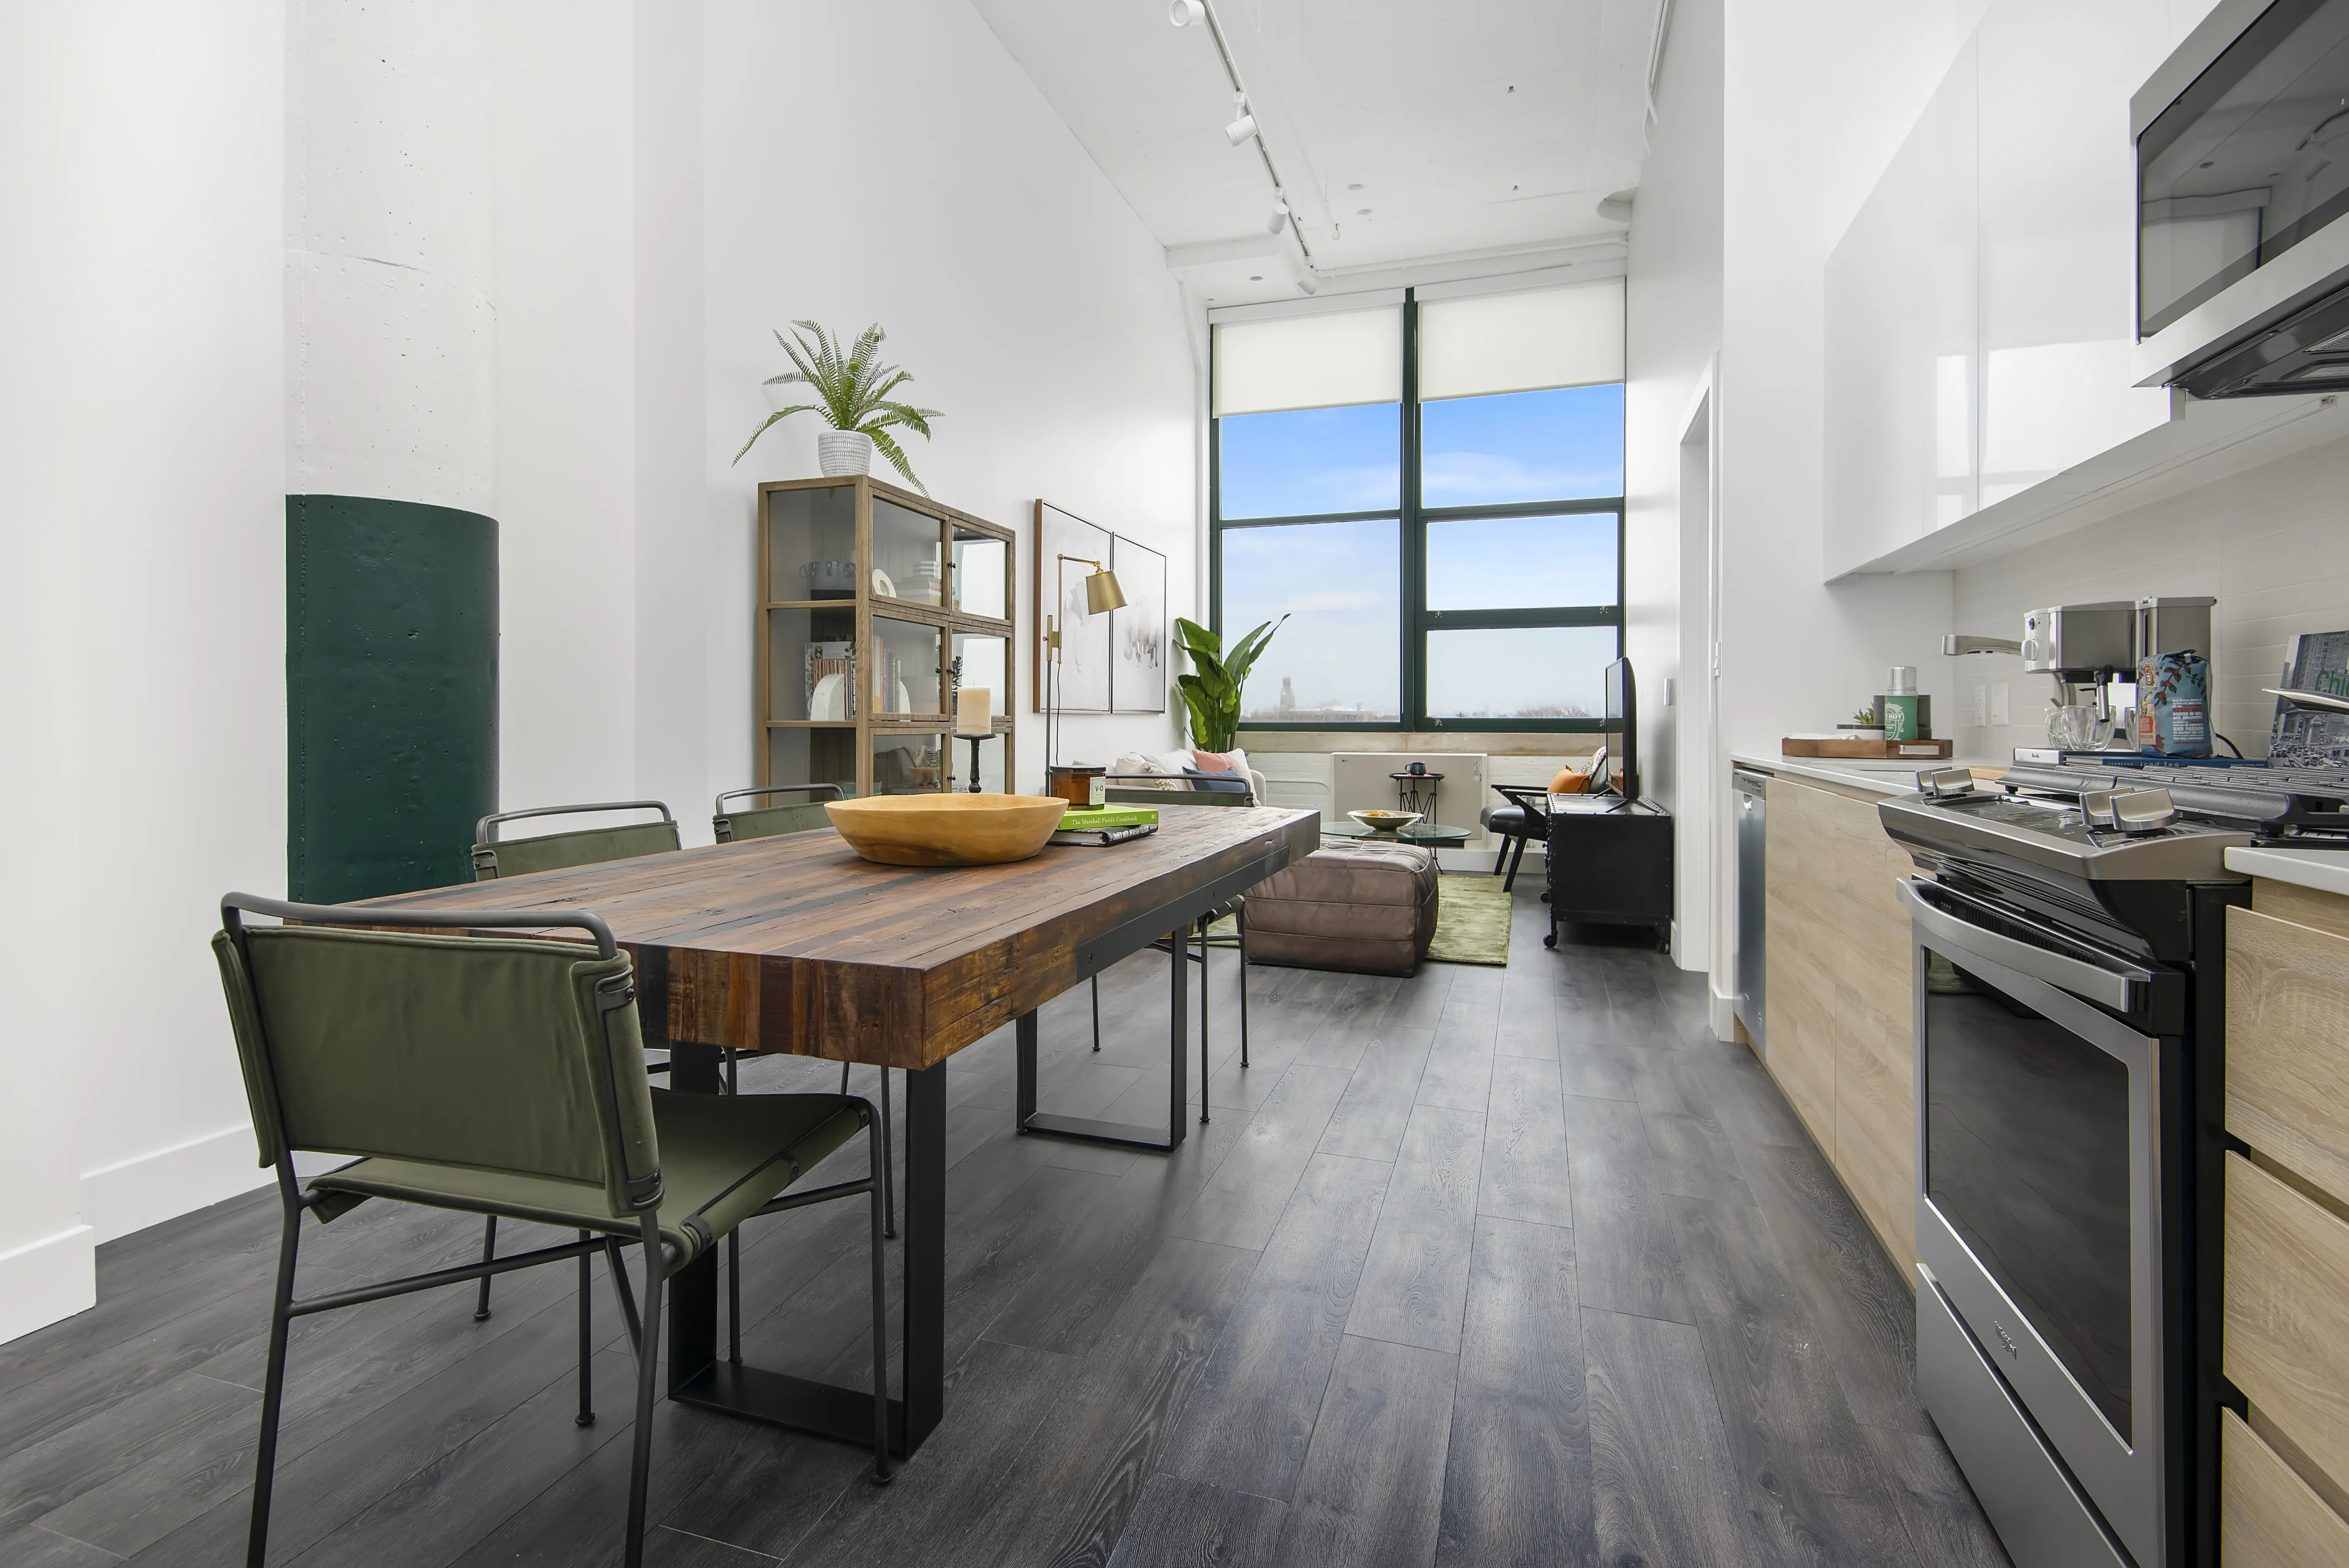 model kitchen, living room and view from Field's Loft Apartments in Chicago